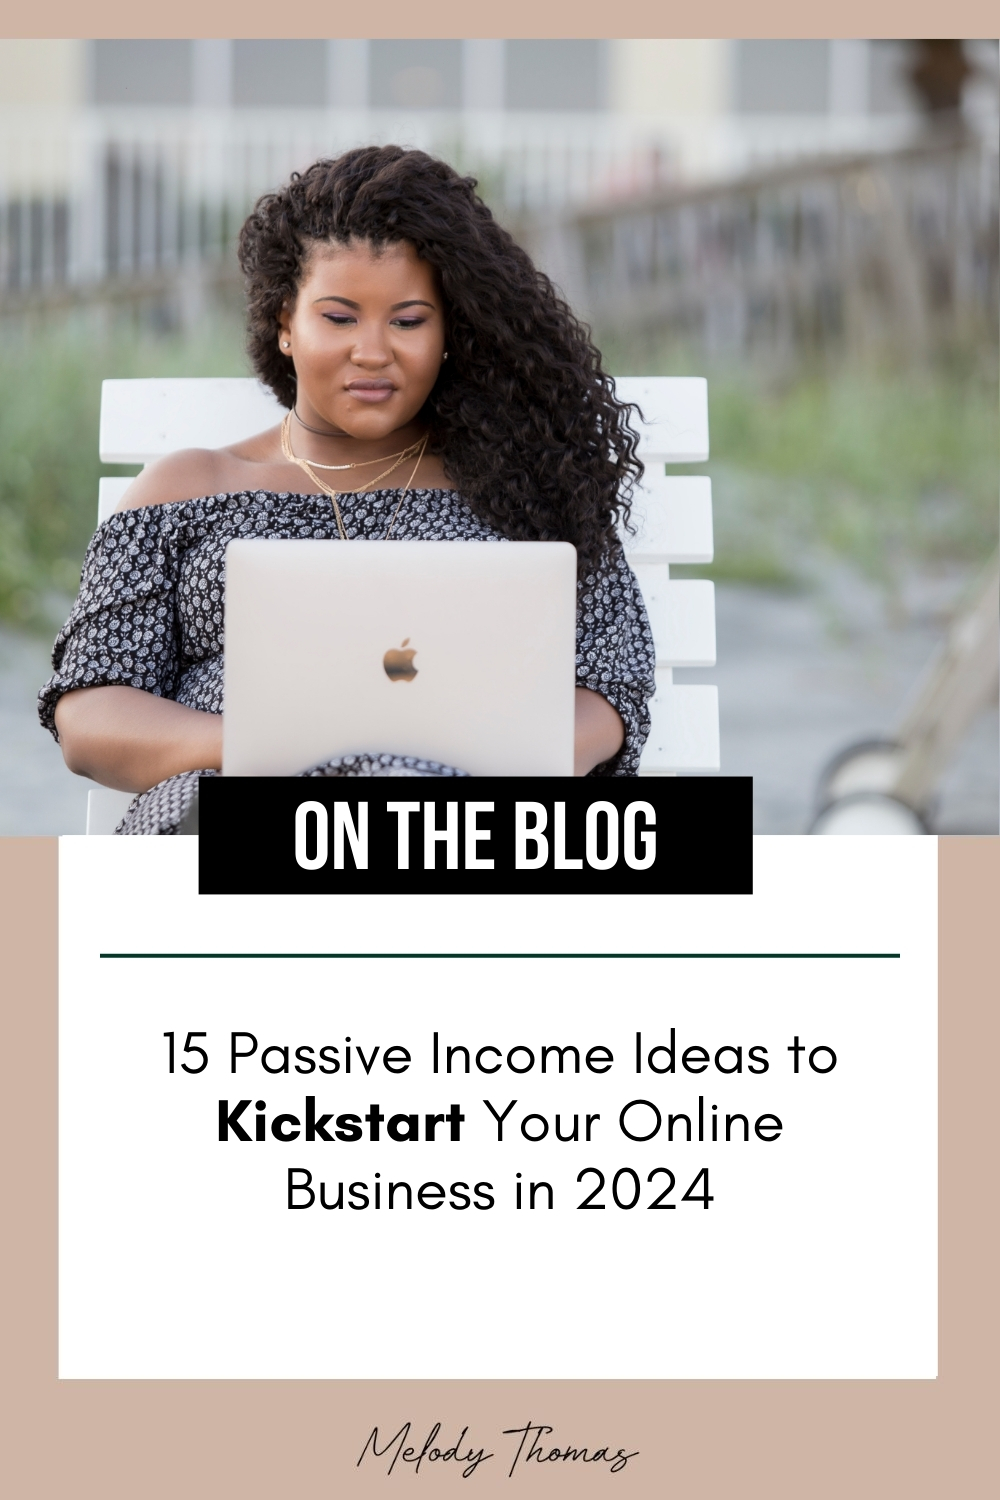 15 Passive Income Ideas to KickStart Your Online Business in 2024